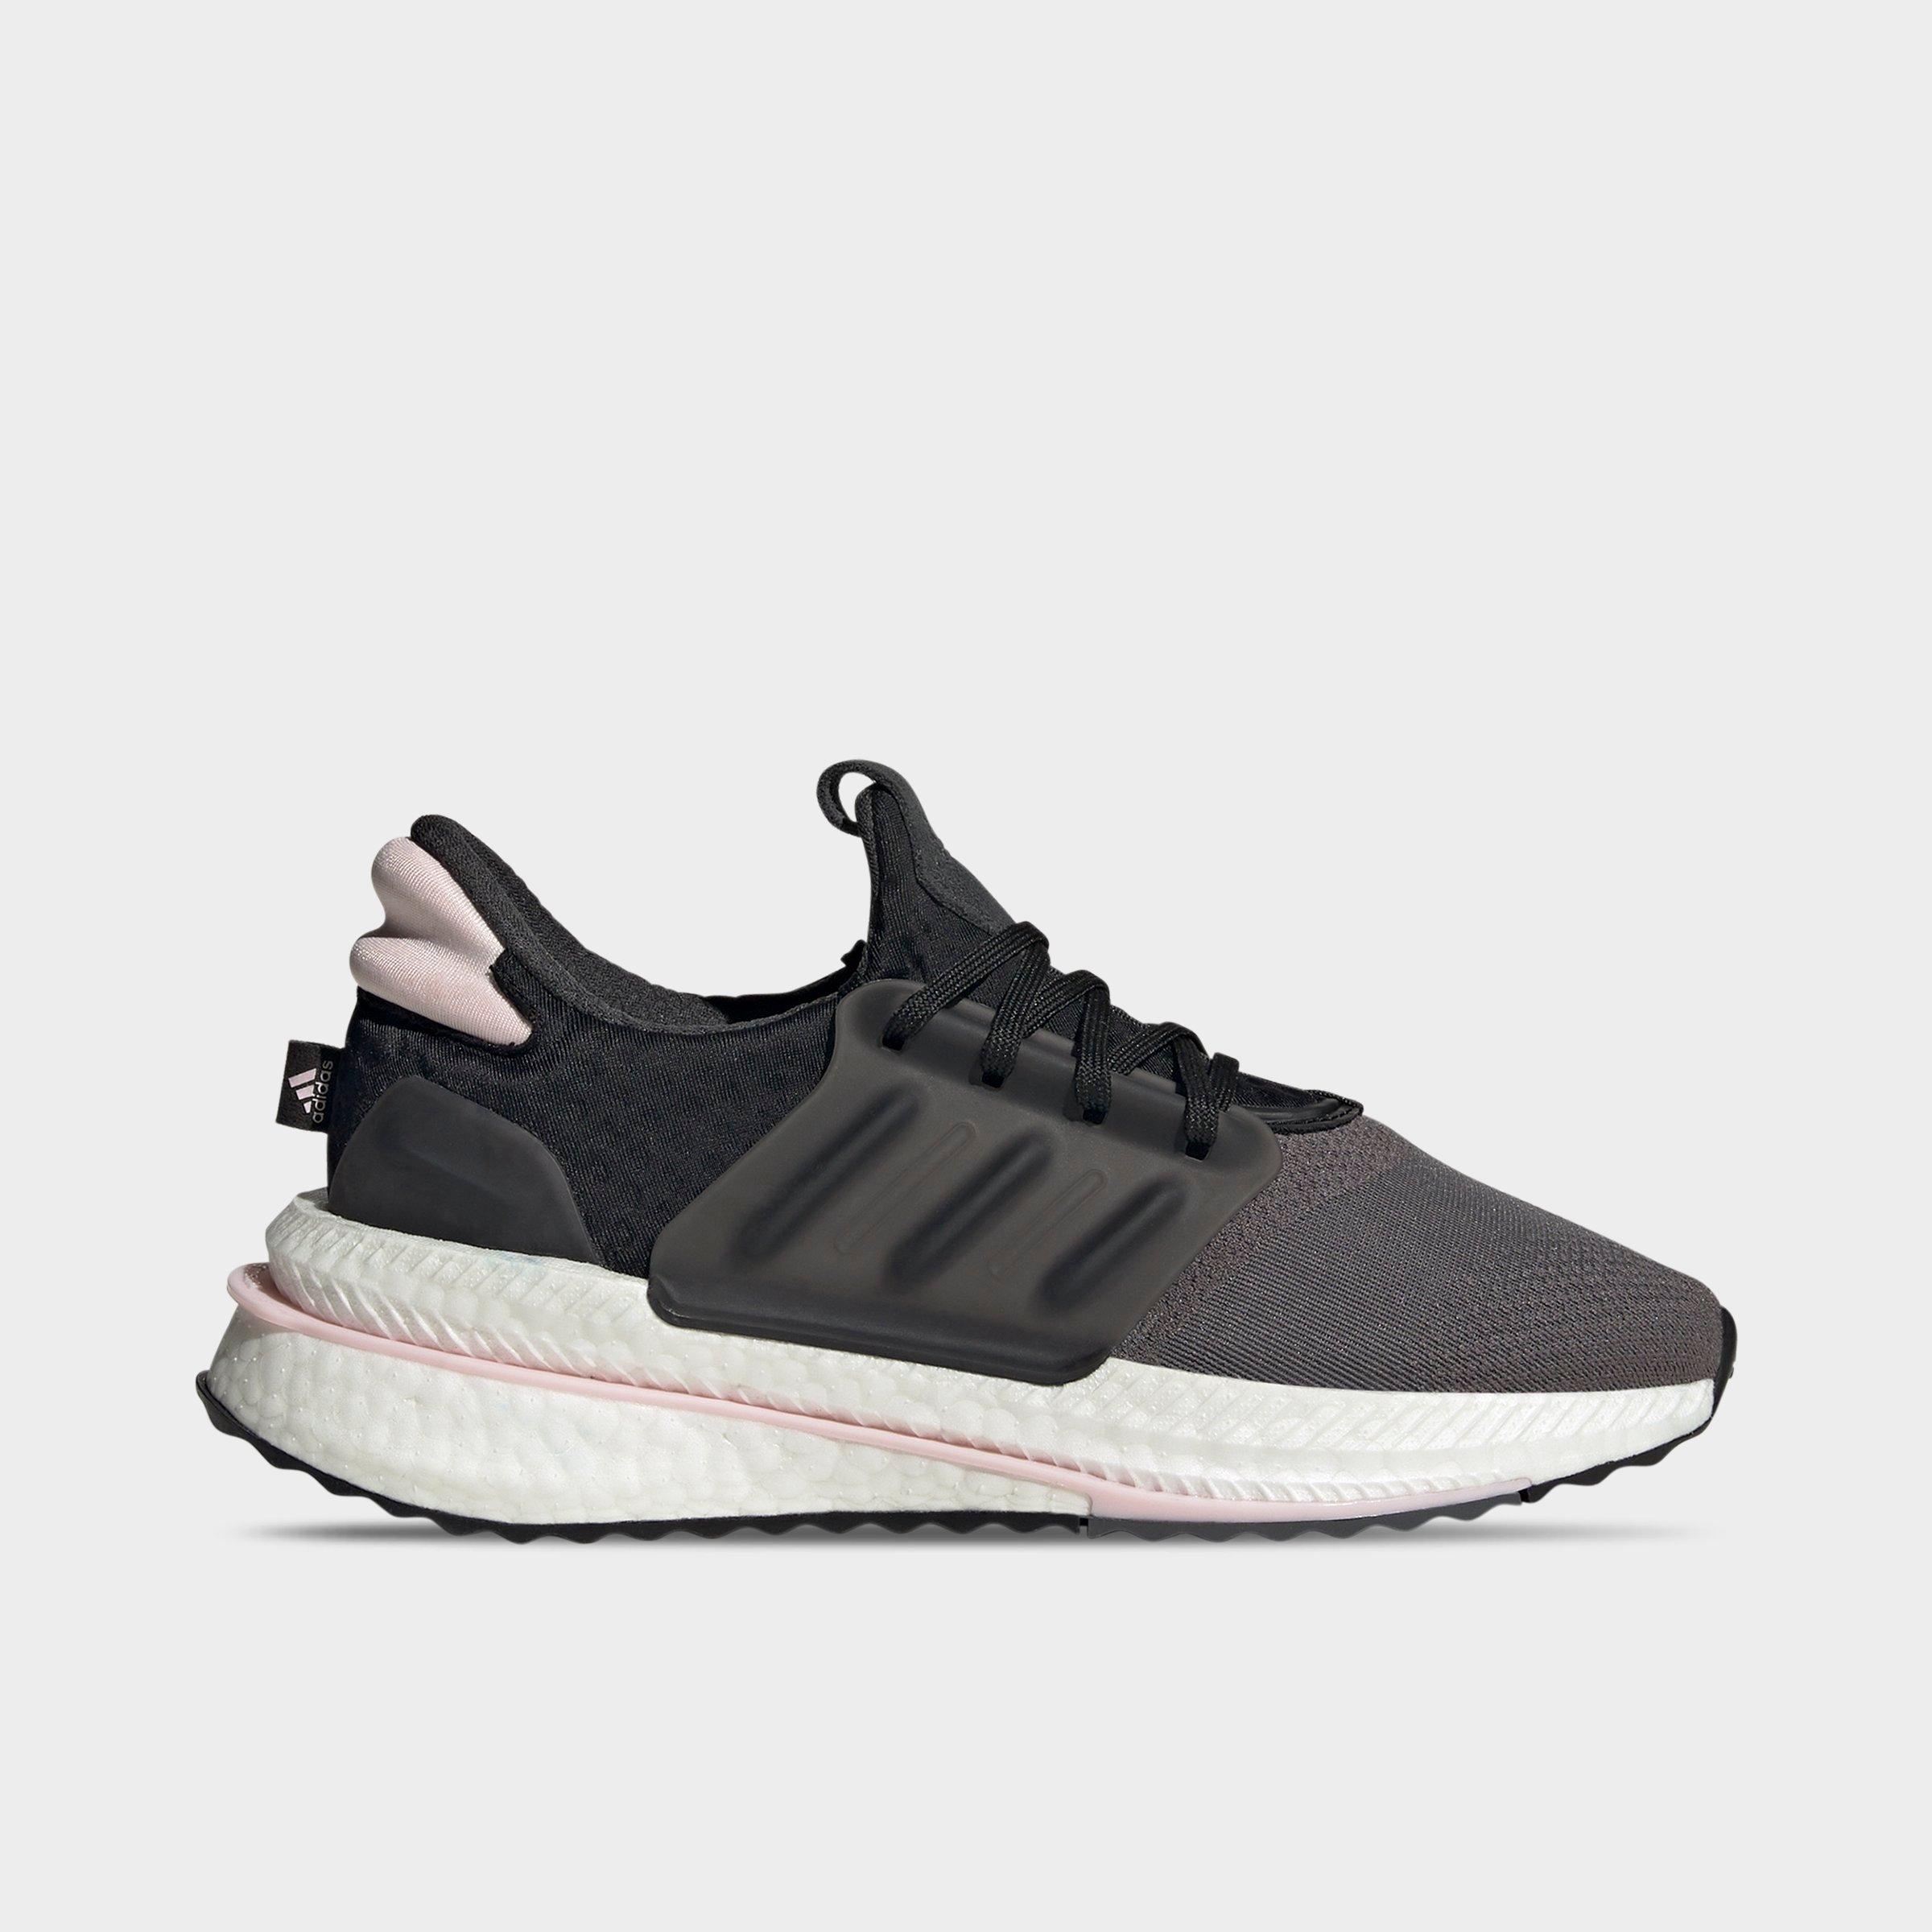 Adidas Originals Adidas Women's Plr Boost Casual Shoes In Grey/black/clear Pink | ModeSens